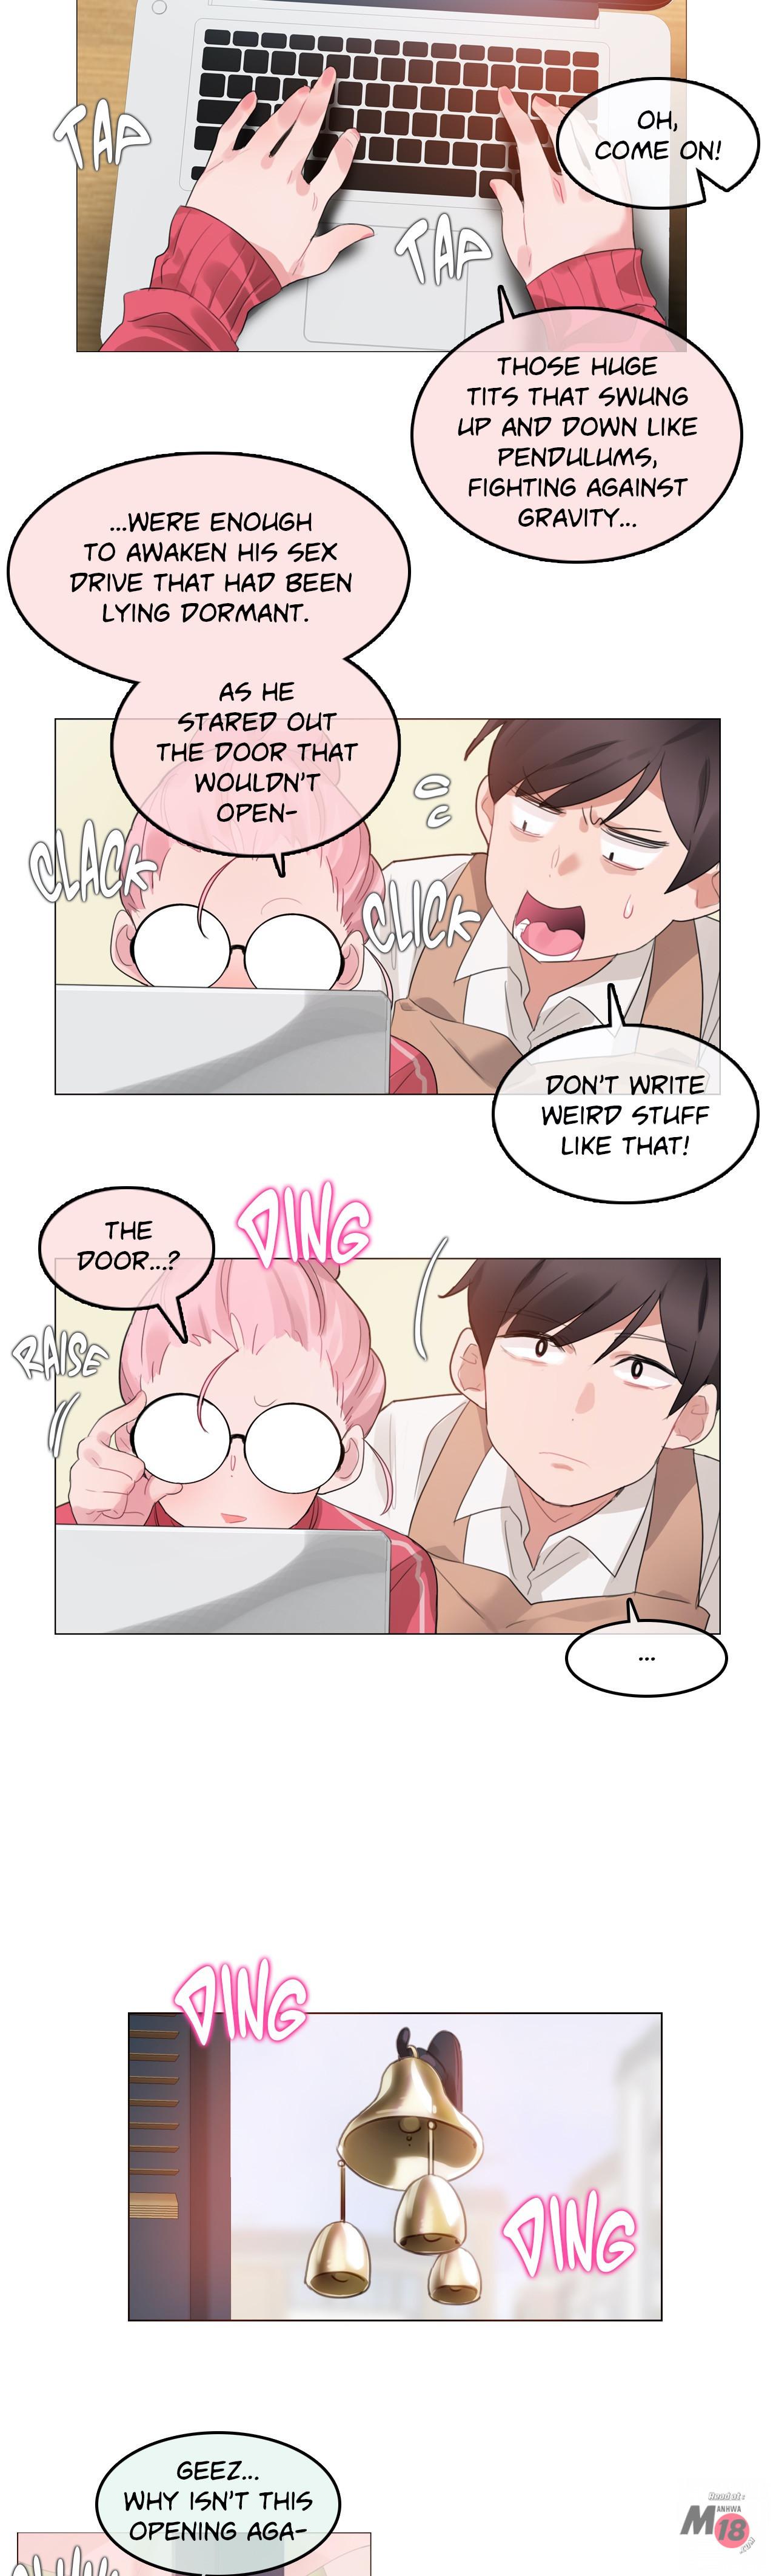 Perverts' Daily Lives Episode 1: Her Secret Recipe Ch1-19 20